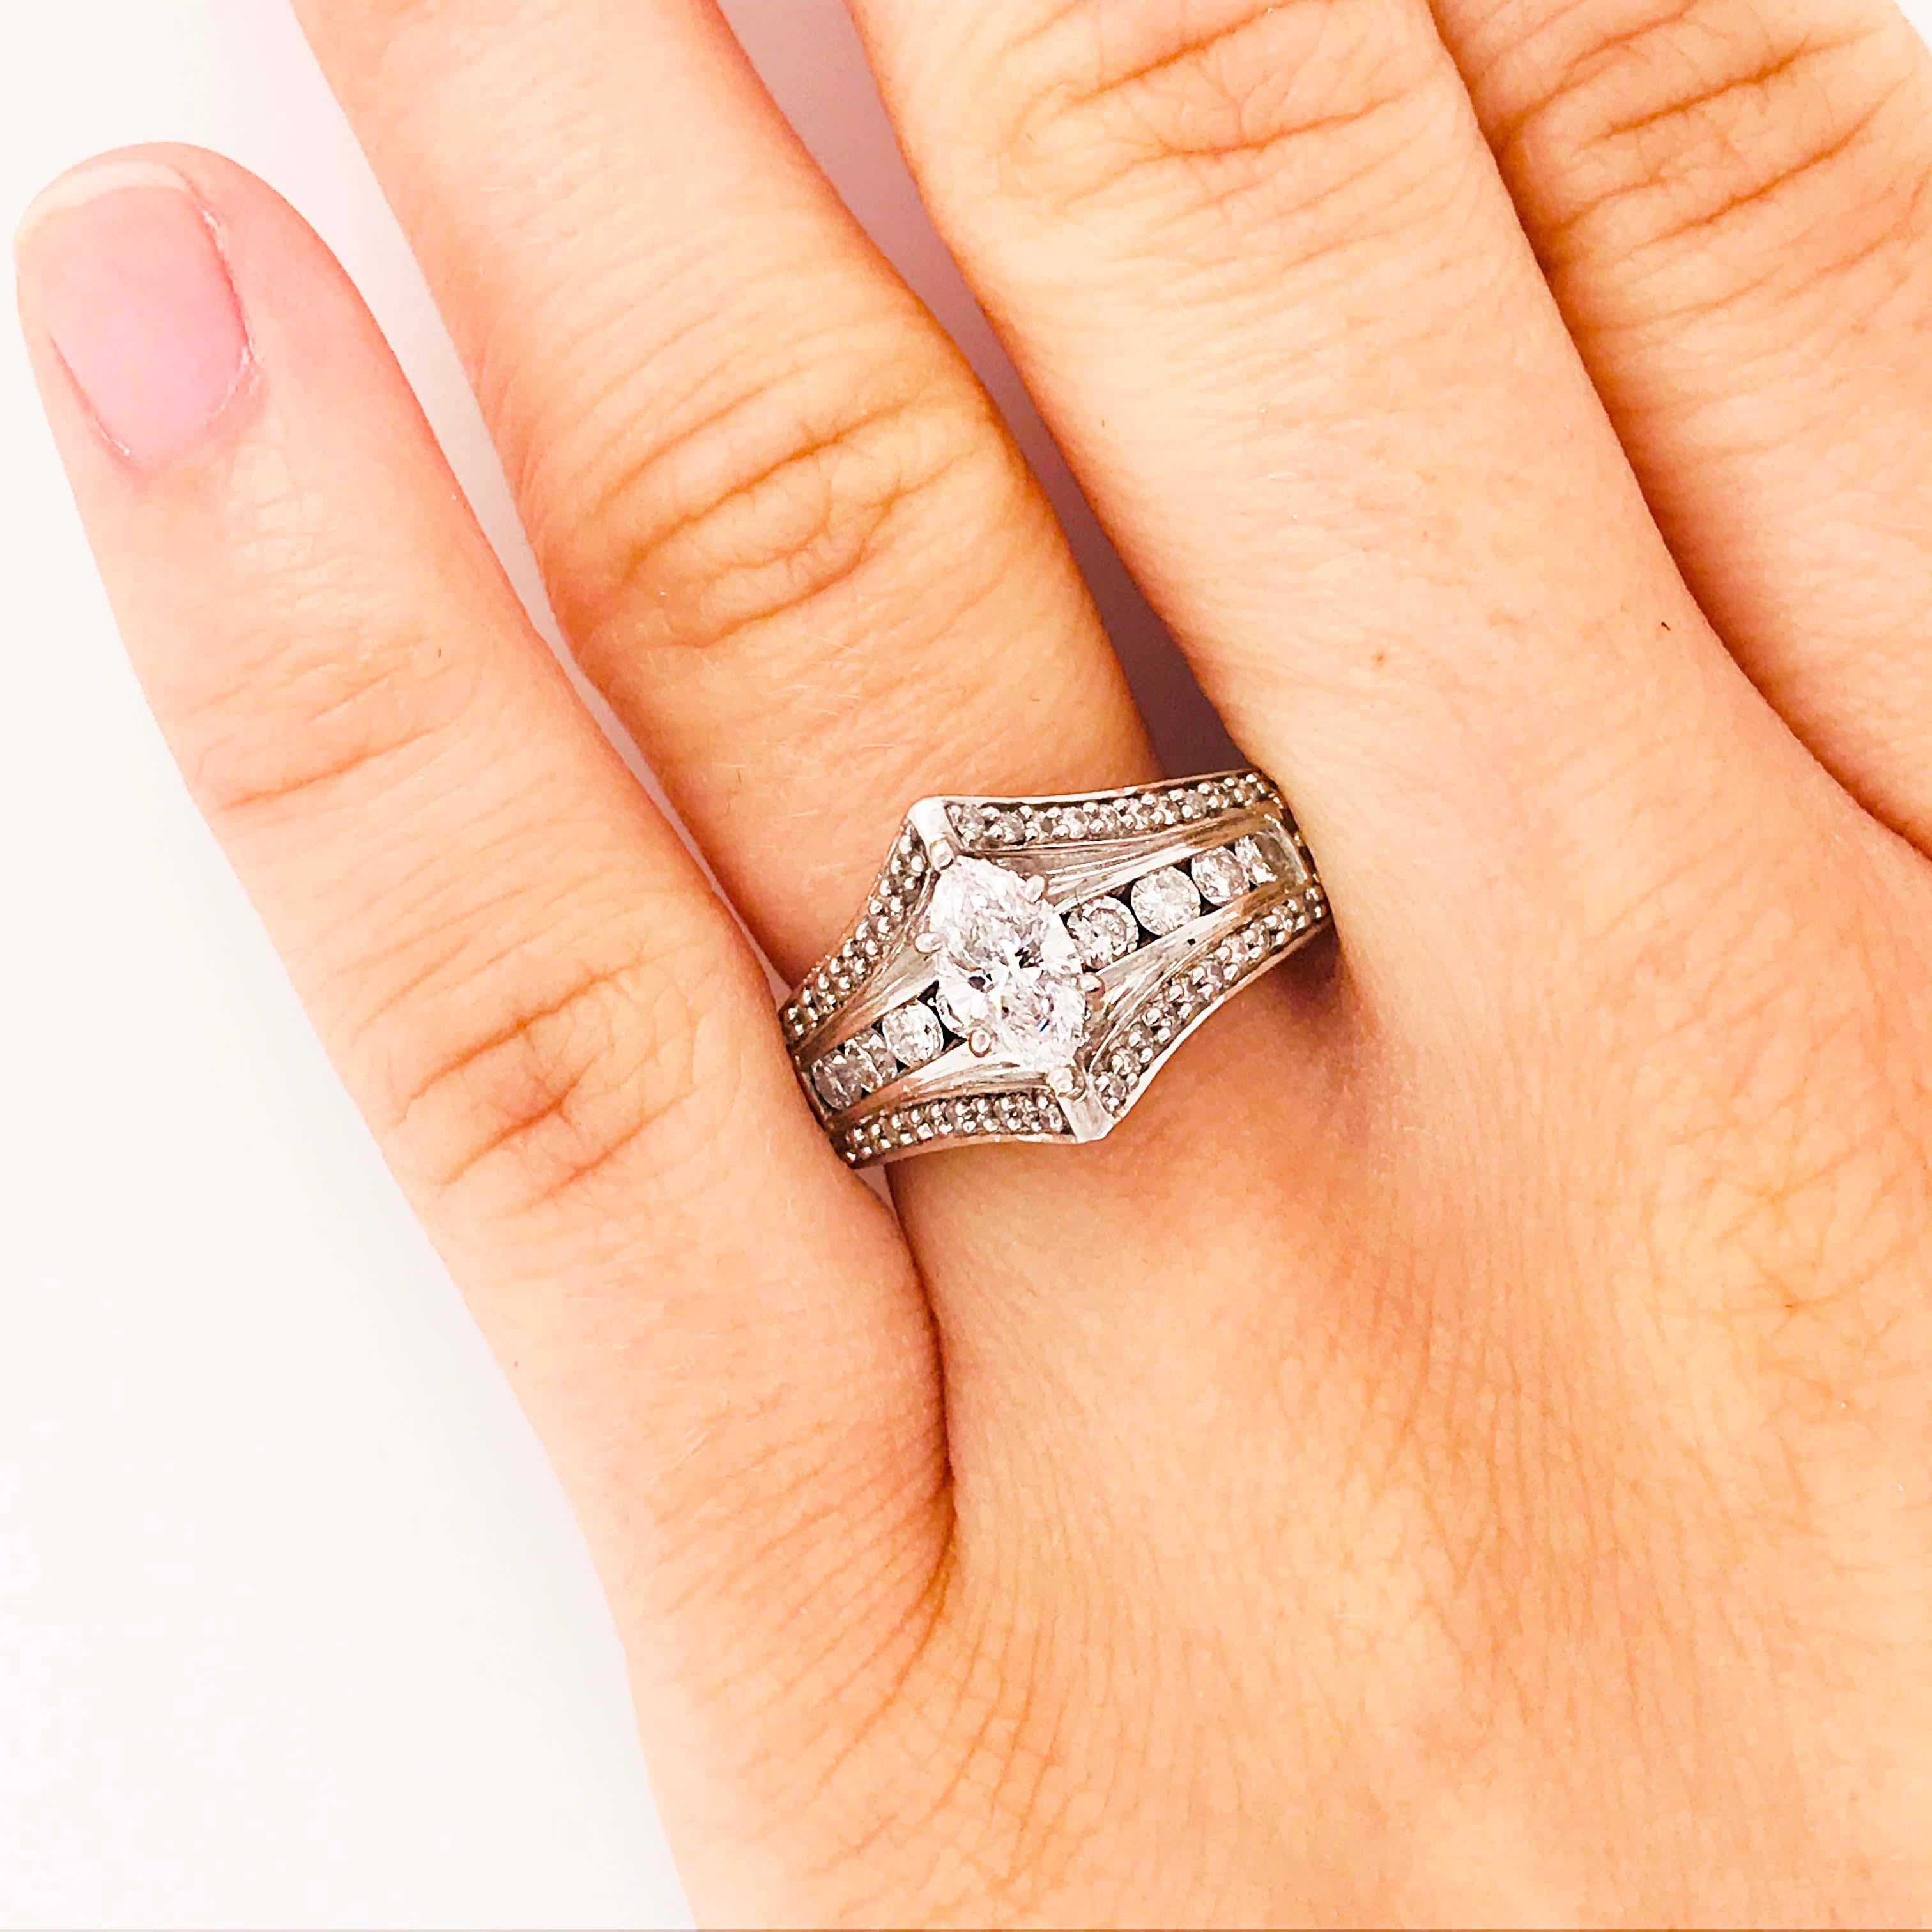 This gorgeous diamond engagement ring is a beautifully crafted, custom design with precious metals and genuine, natural diamonds! The earth mined marquise diamond engagement ring has a genuine, natural marquise shaped diamond set in a six prong